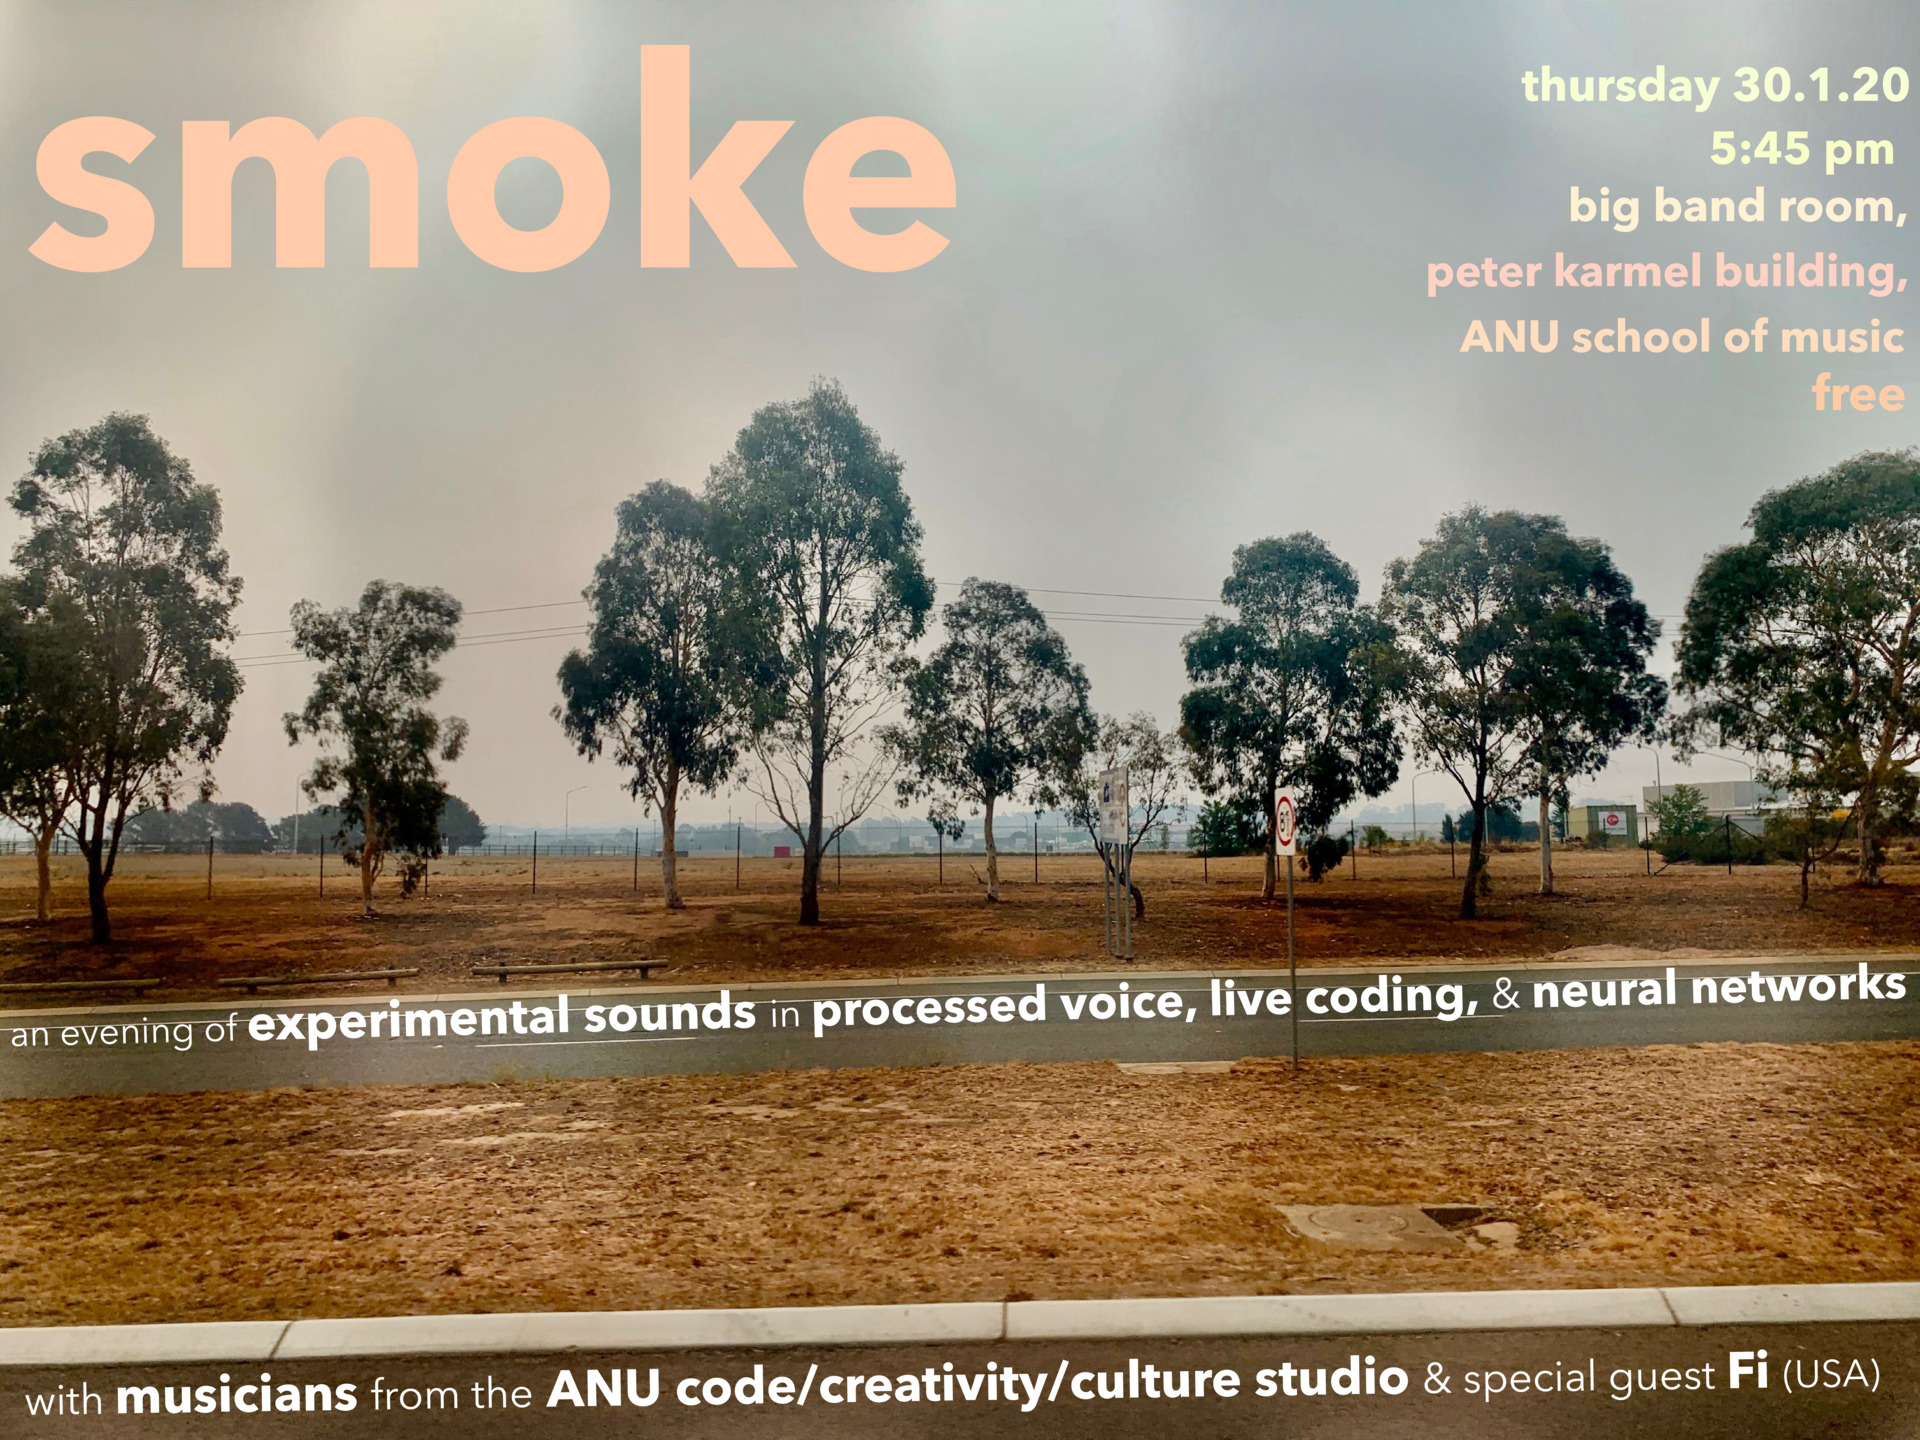 ad for Smoke gig - see FB event for details